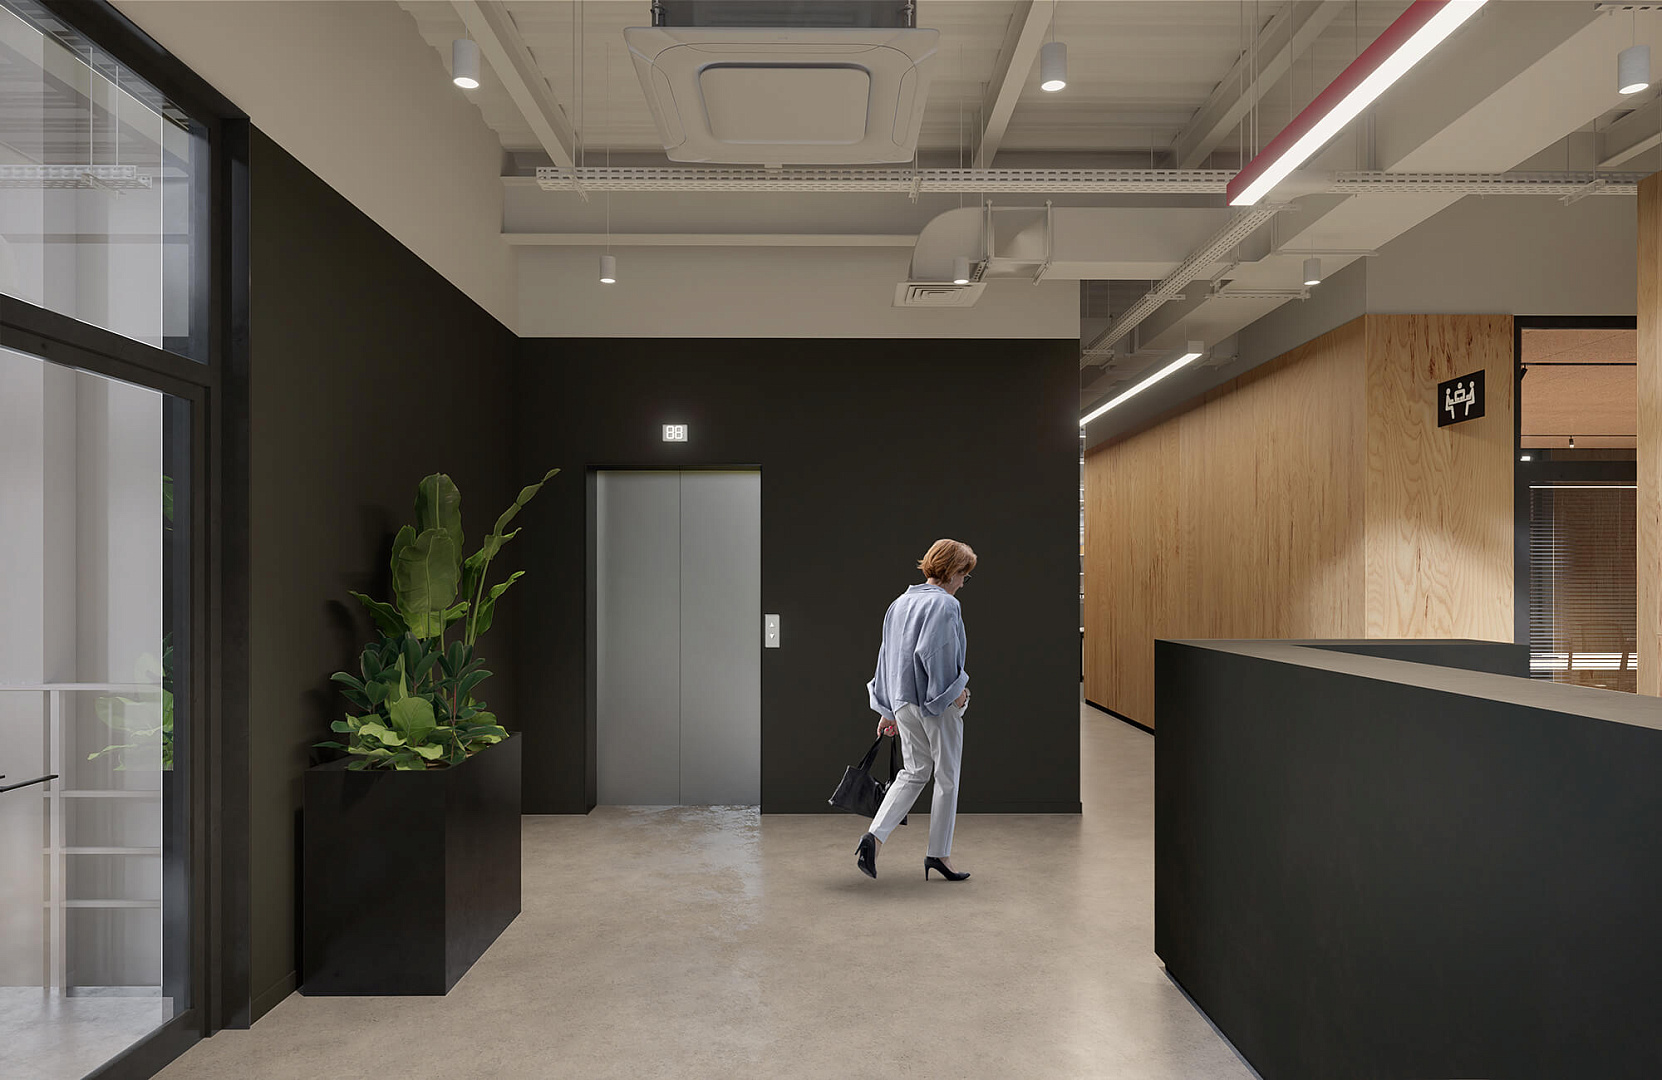 POISK Company Office by PROJECT architectural bureau